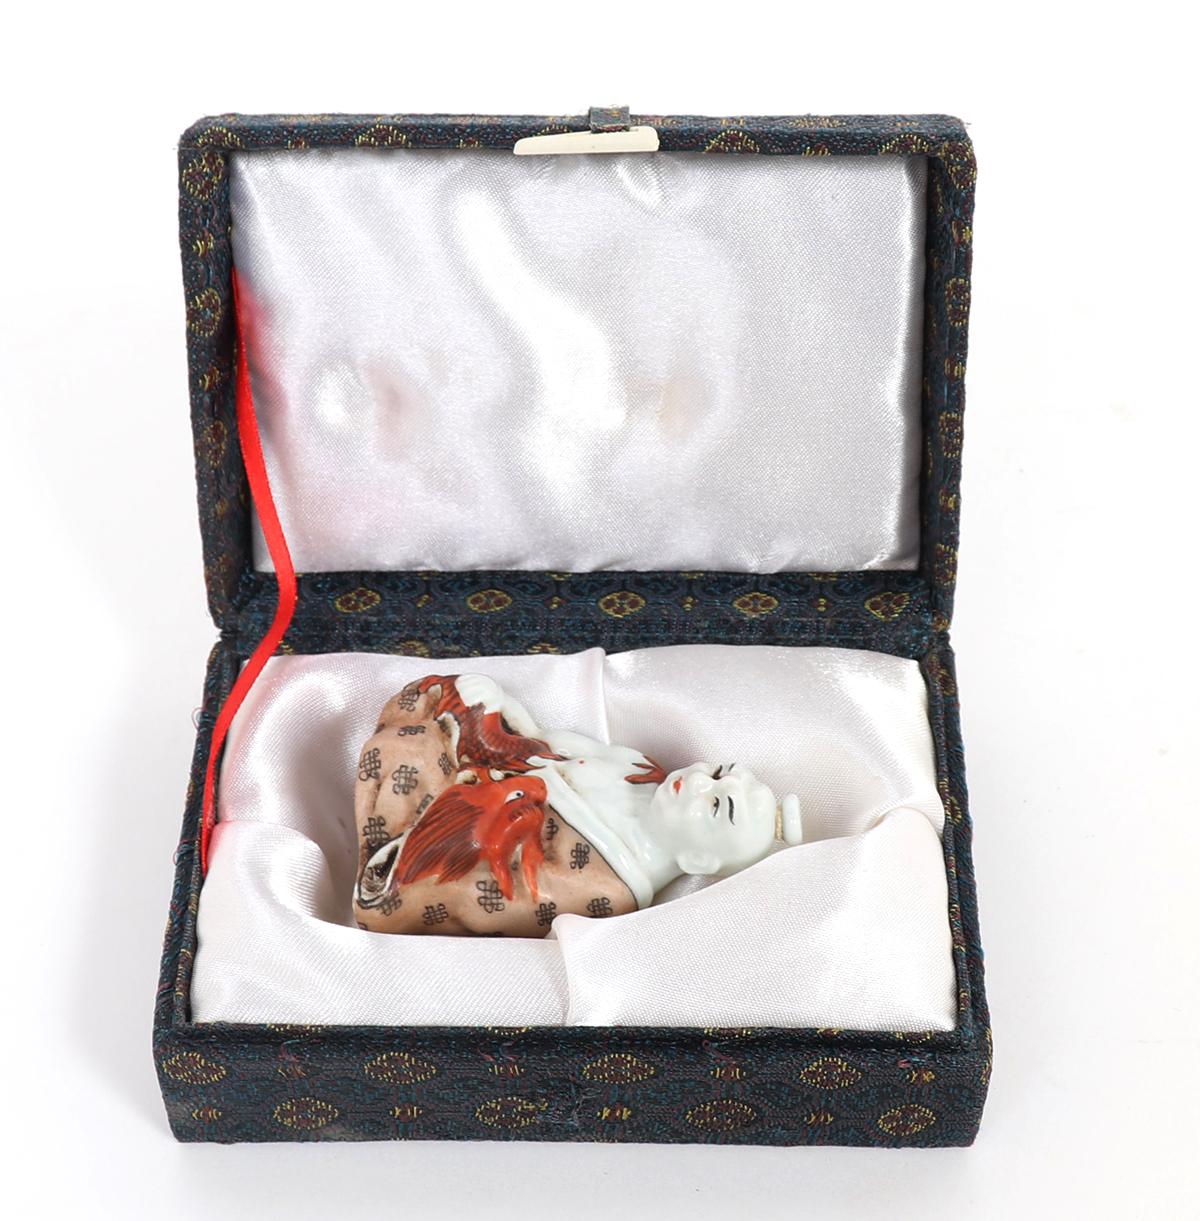 Chinese Porcelain Seated Monk Snuff Bottle w/Dragon